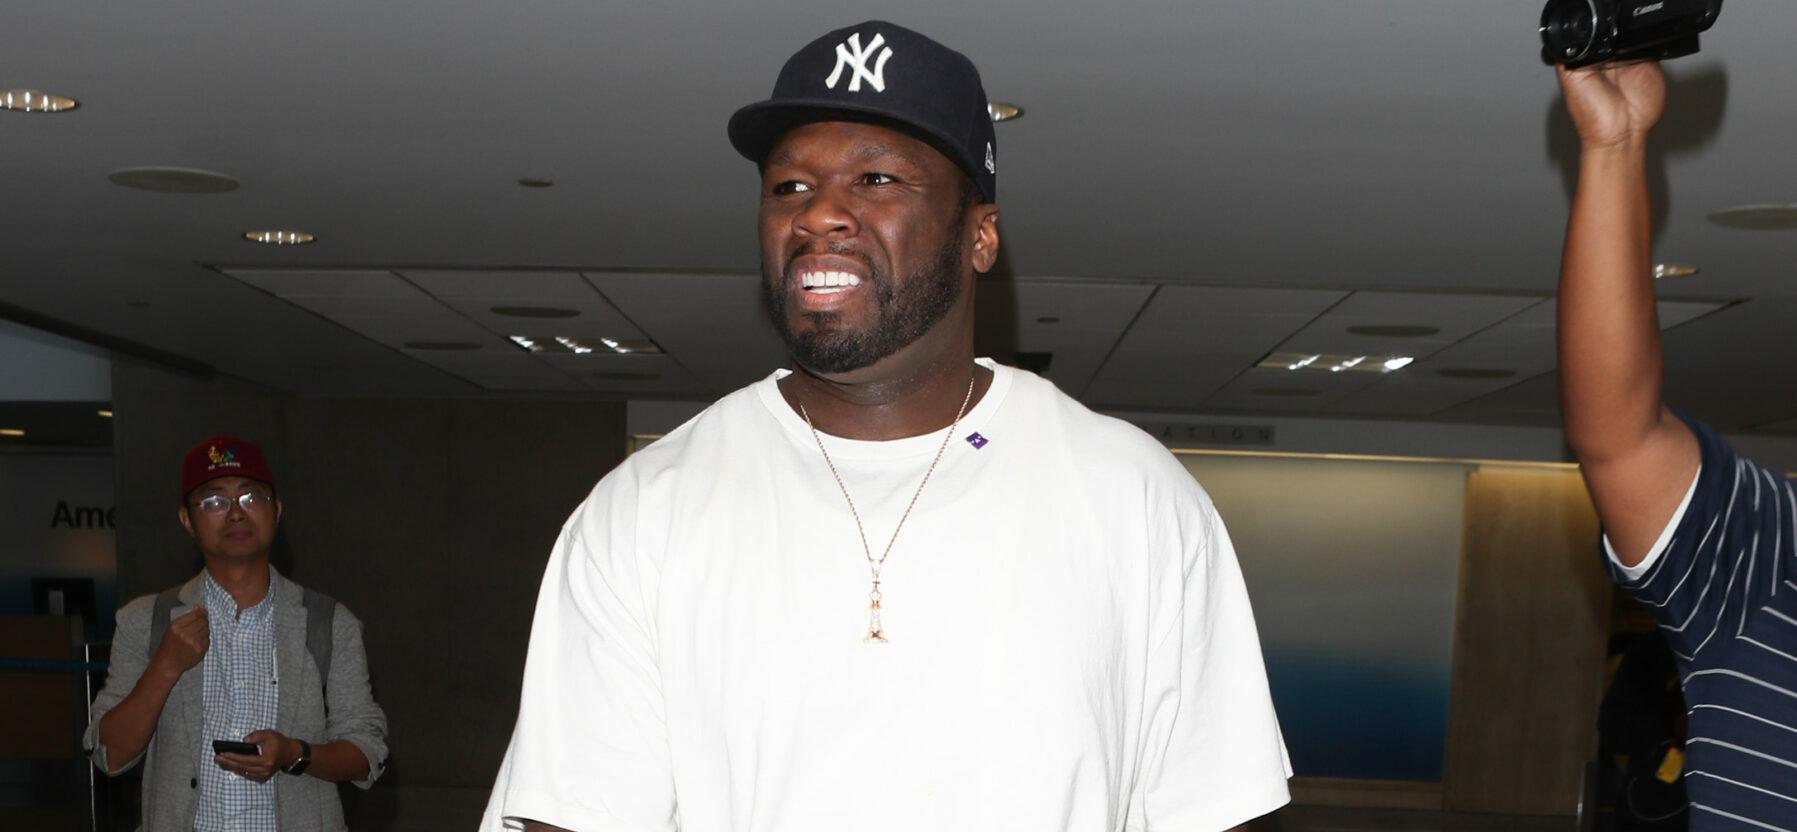 50 Cent Trolls Former Employee After Winning Lawsuit, Plans To Renovate Newly Acquired Property